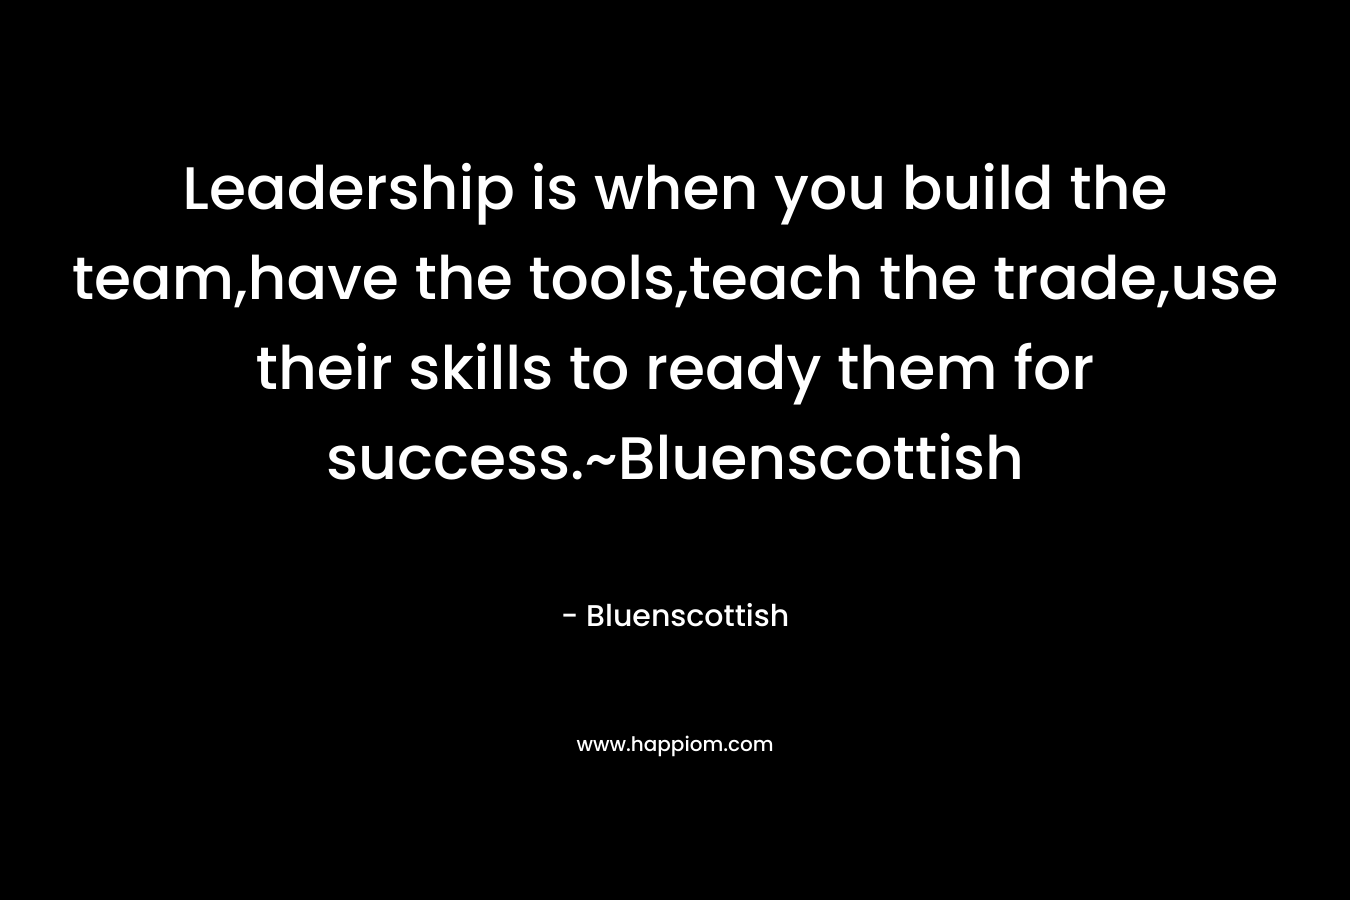 Leadership is when you build the team,have the tools,teach the trade,use their skills to ready them for success.~Bluenscottish